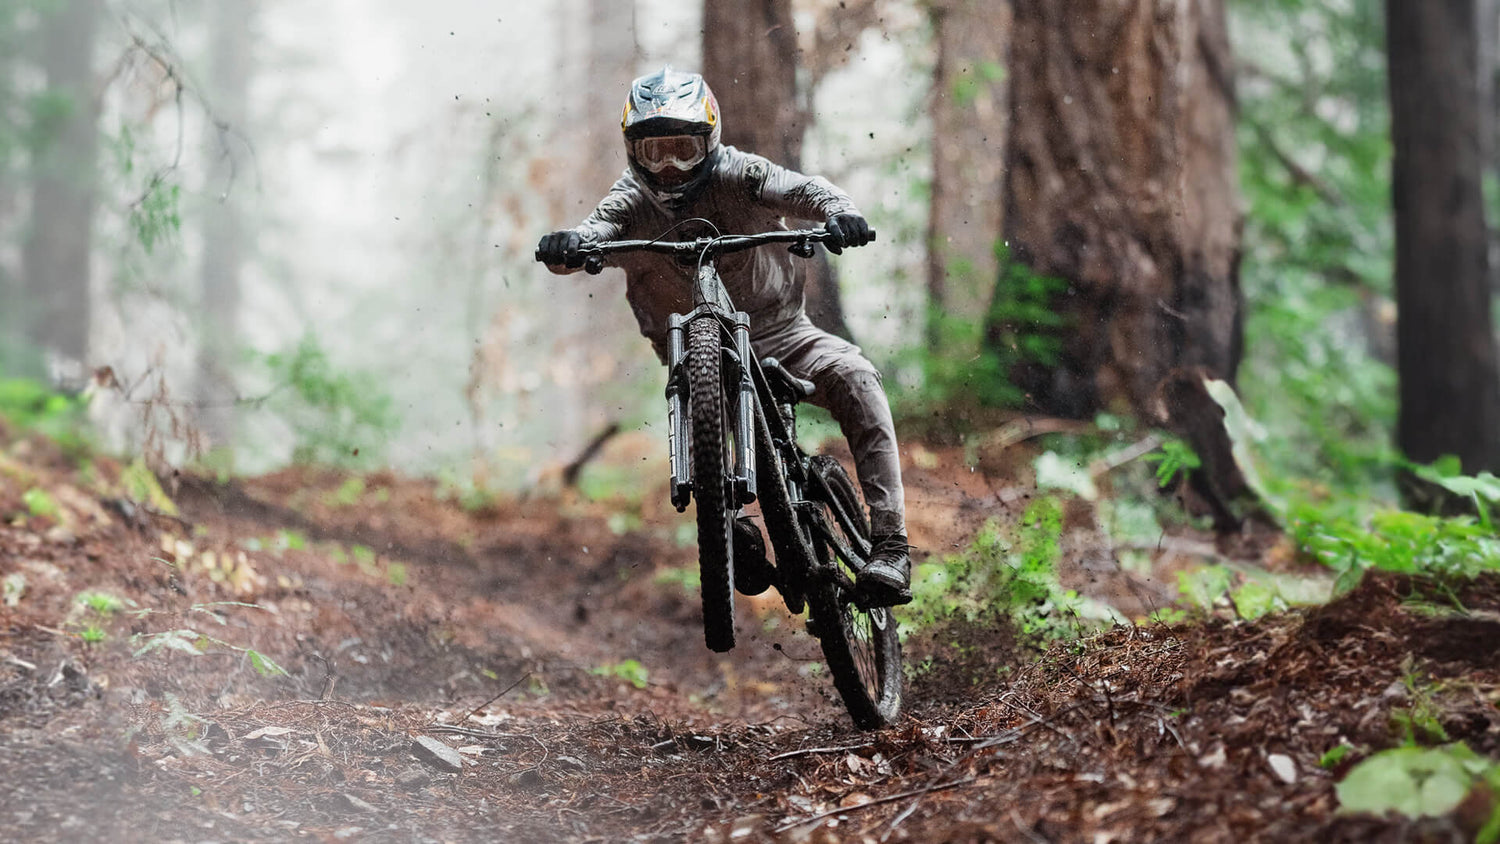 Mountain Bike rider in the forest.